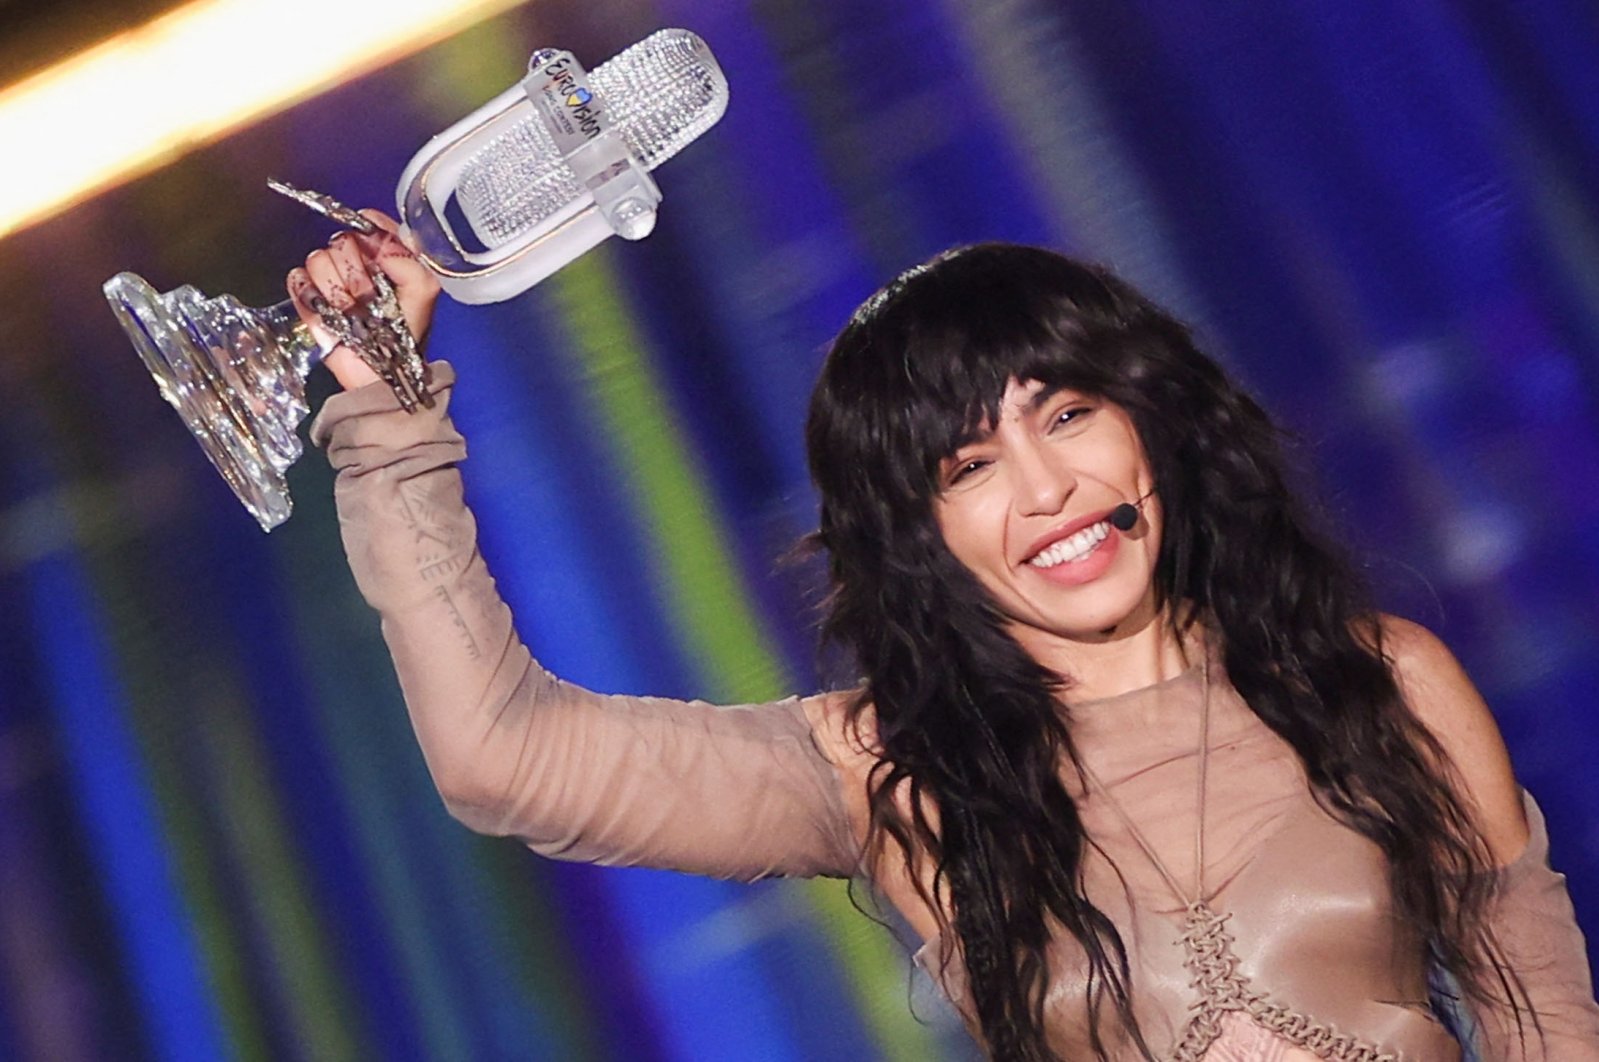 Loreen from Sweden holds her trophy after winning the 2023 Eurovision Song Contest, in Liverpool, U.K., May 14, 2023. (Reuters Photo)